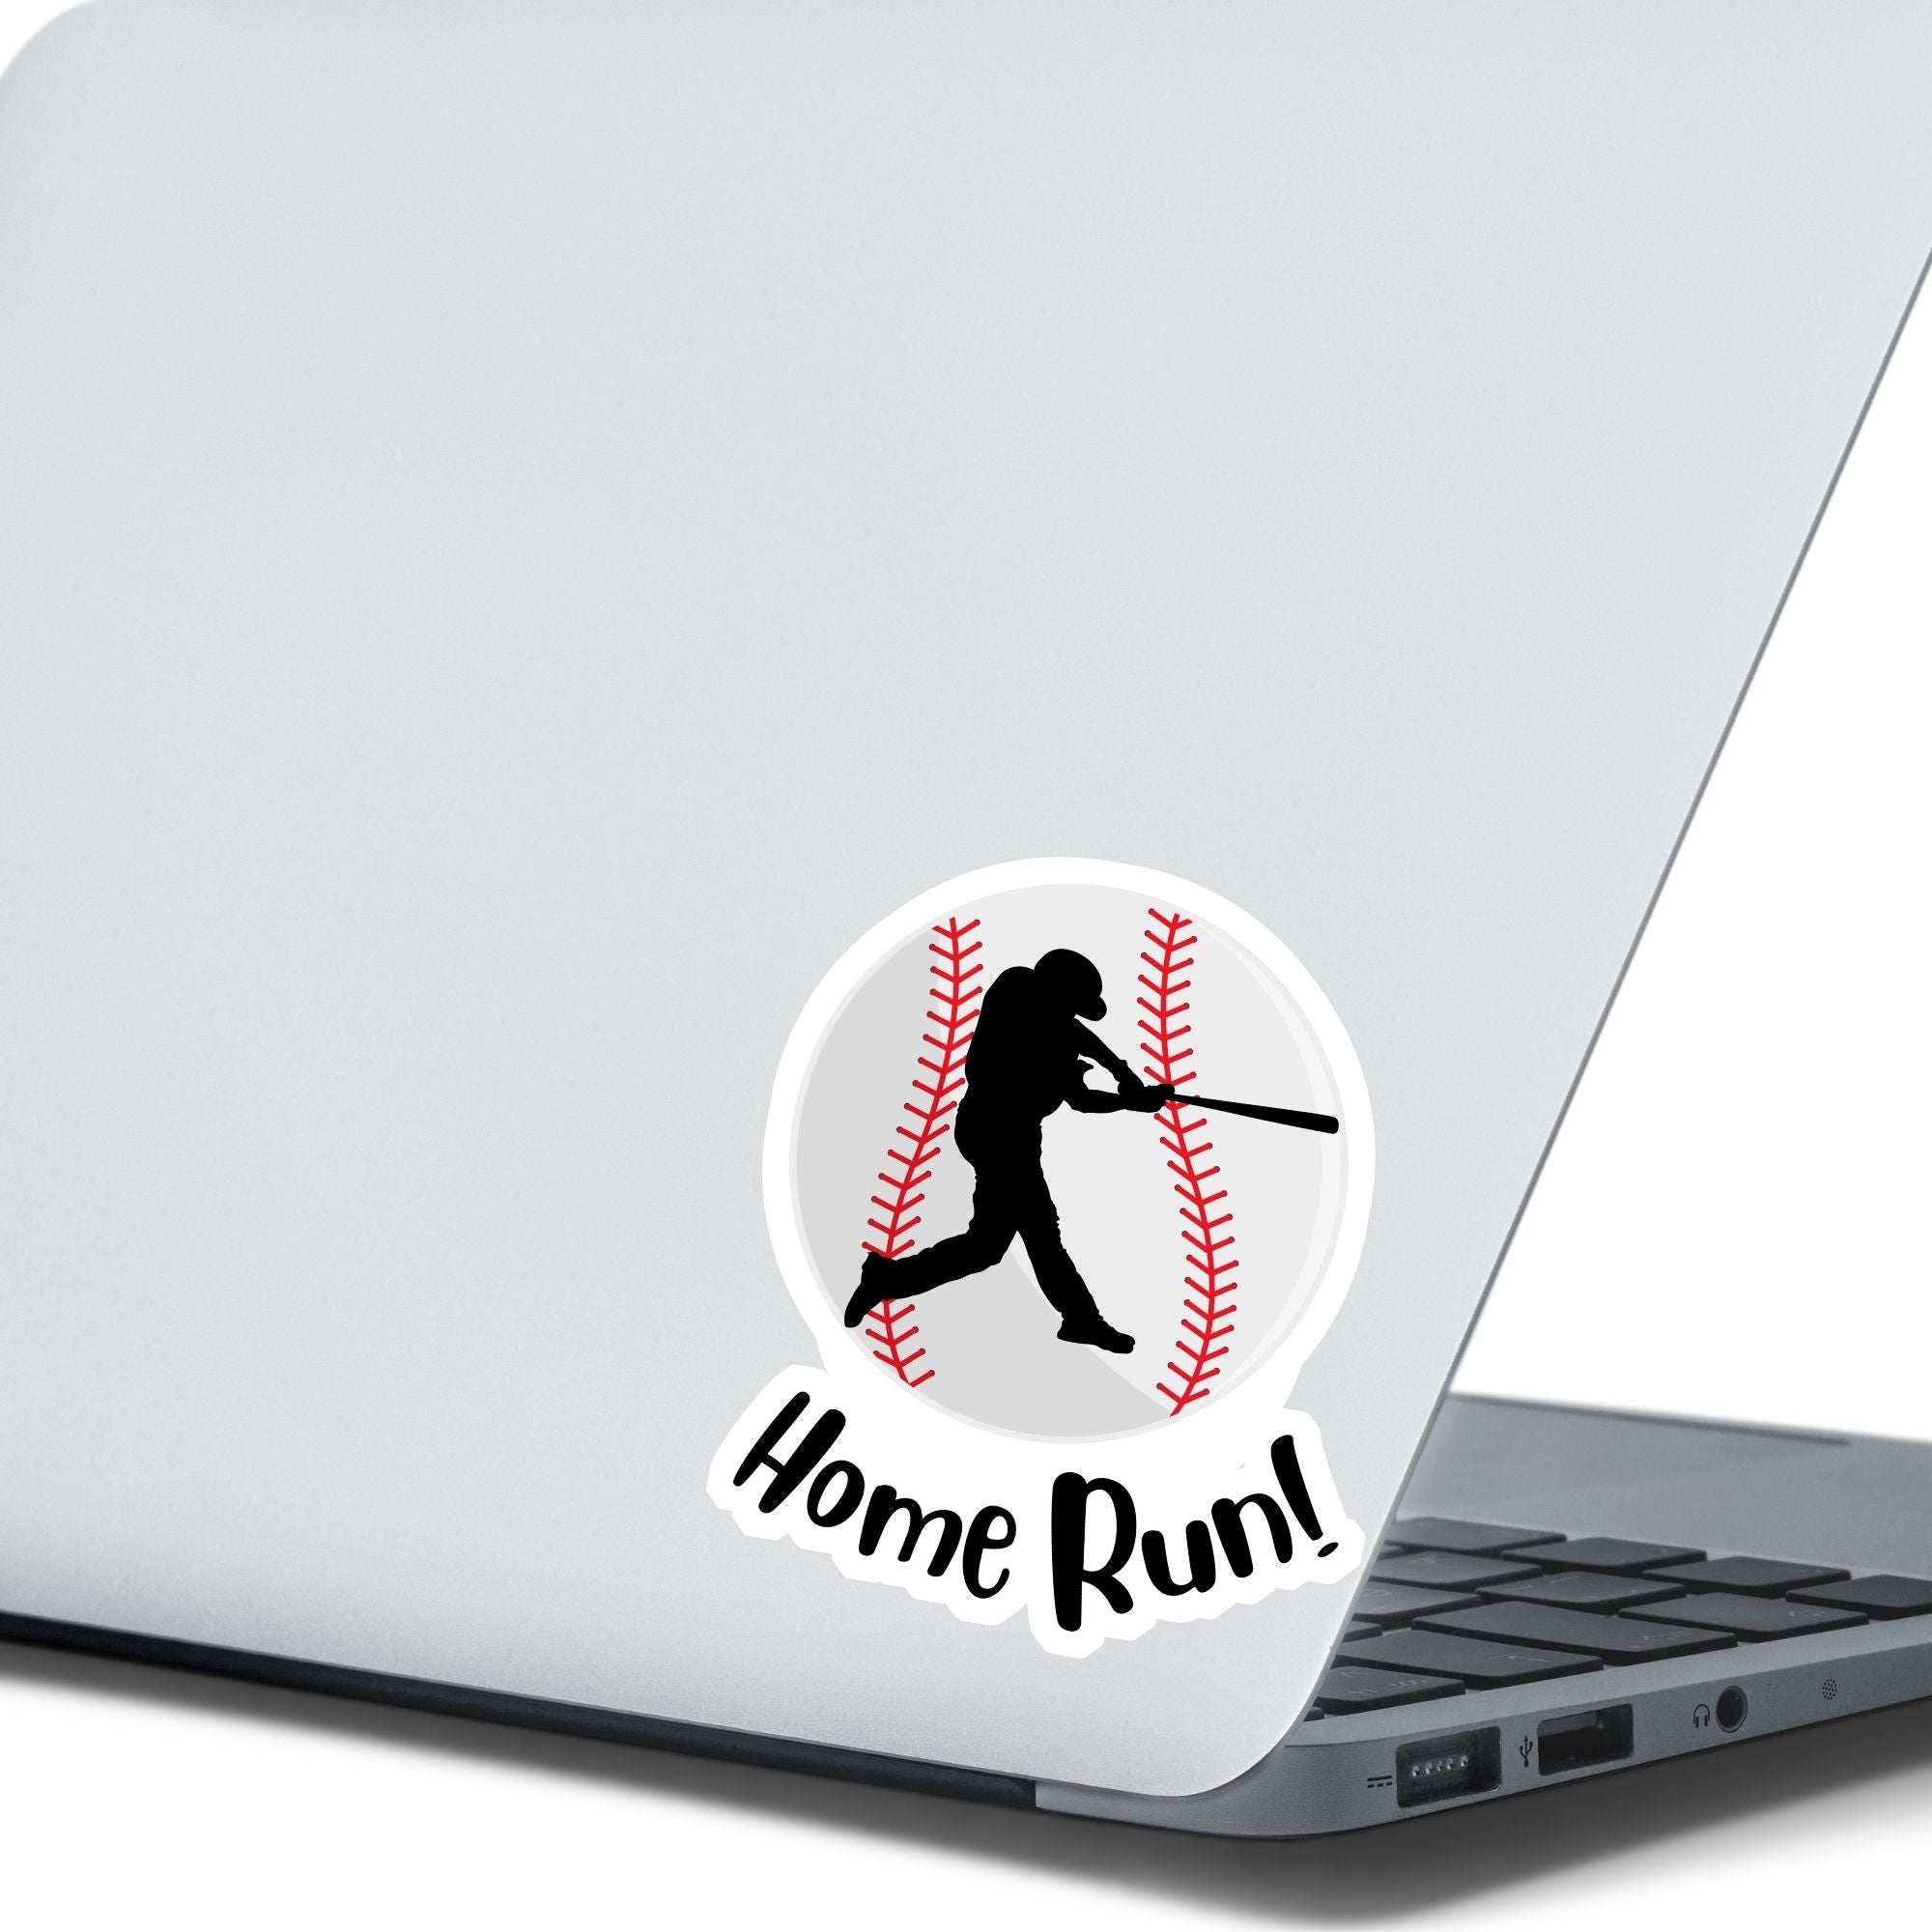 Knock it out of the park! This individual die-cut sticker features the silhouette of a baseball player swinging a bat, on a background of a baseball, with the word "Homerun!" below. This image shows the baseball sticker on the back of an open laptop.